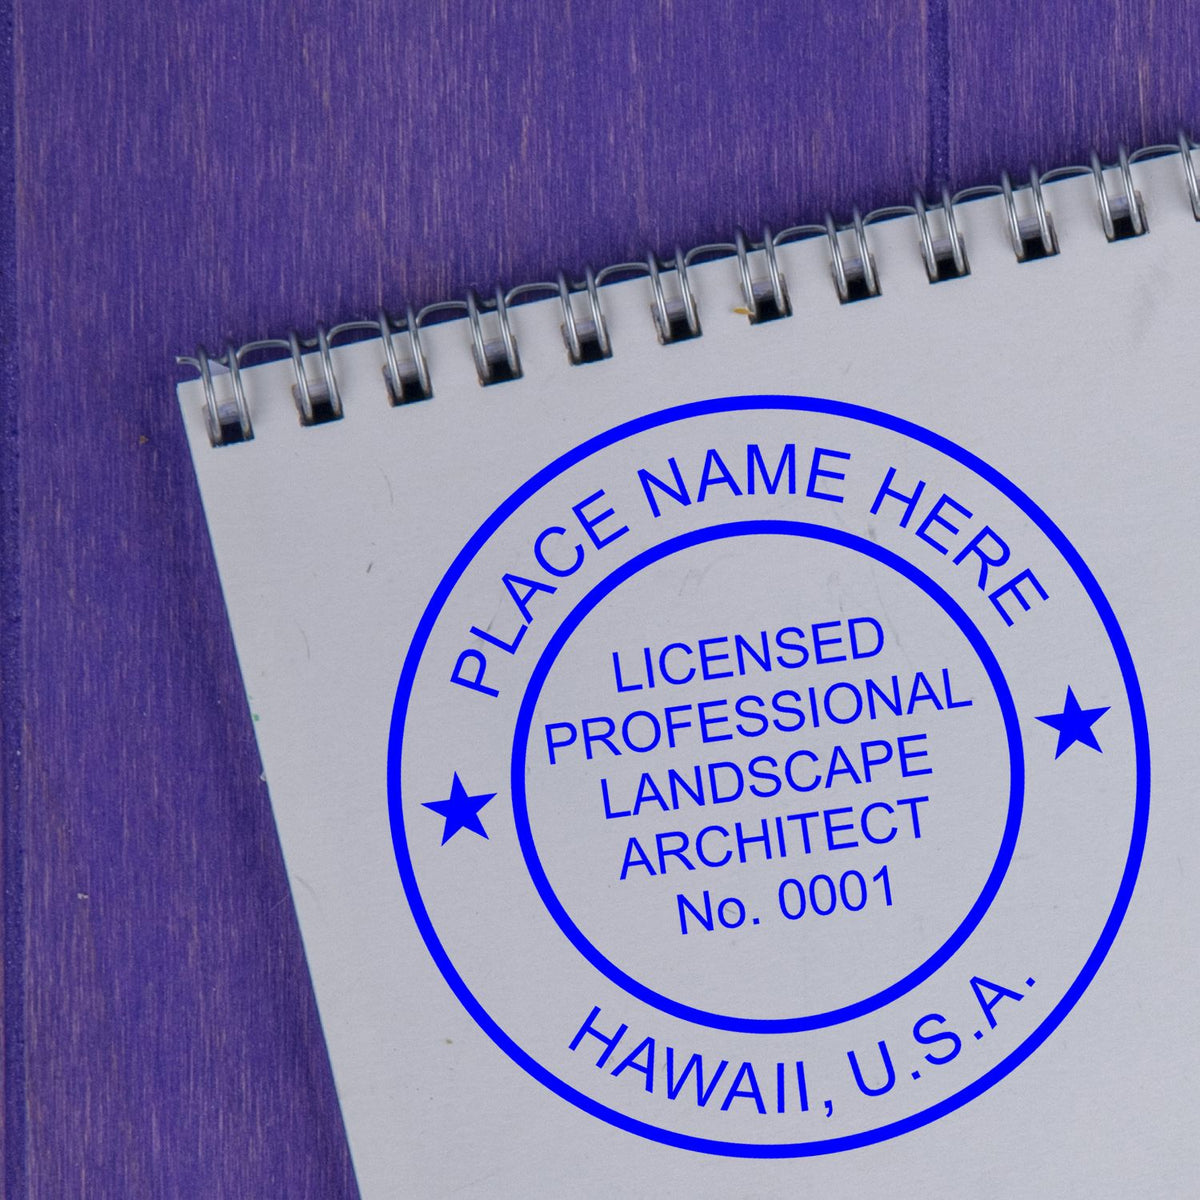 This paper is stamped with a sample imprint of the Self-Inking Hawaii Landscape Architect Stamp, signifying its quality and reliability.